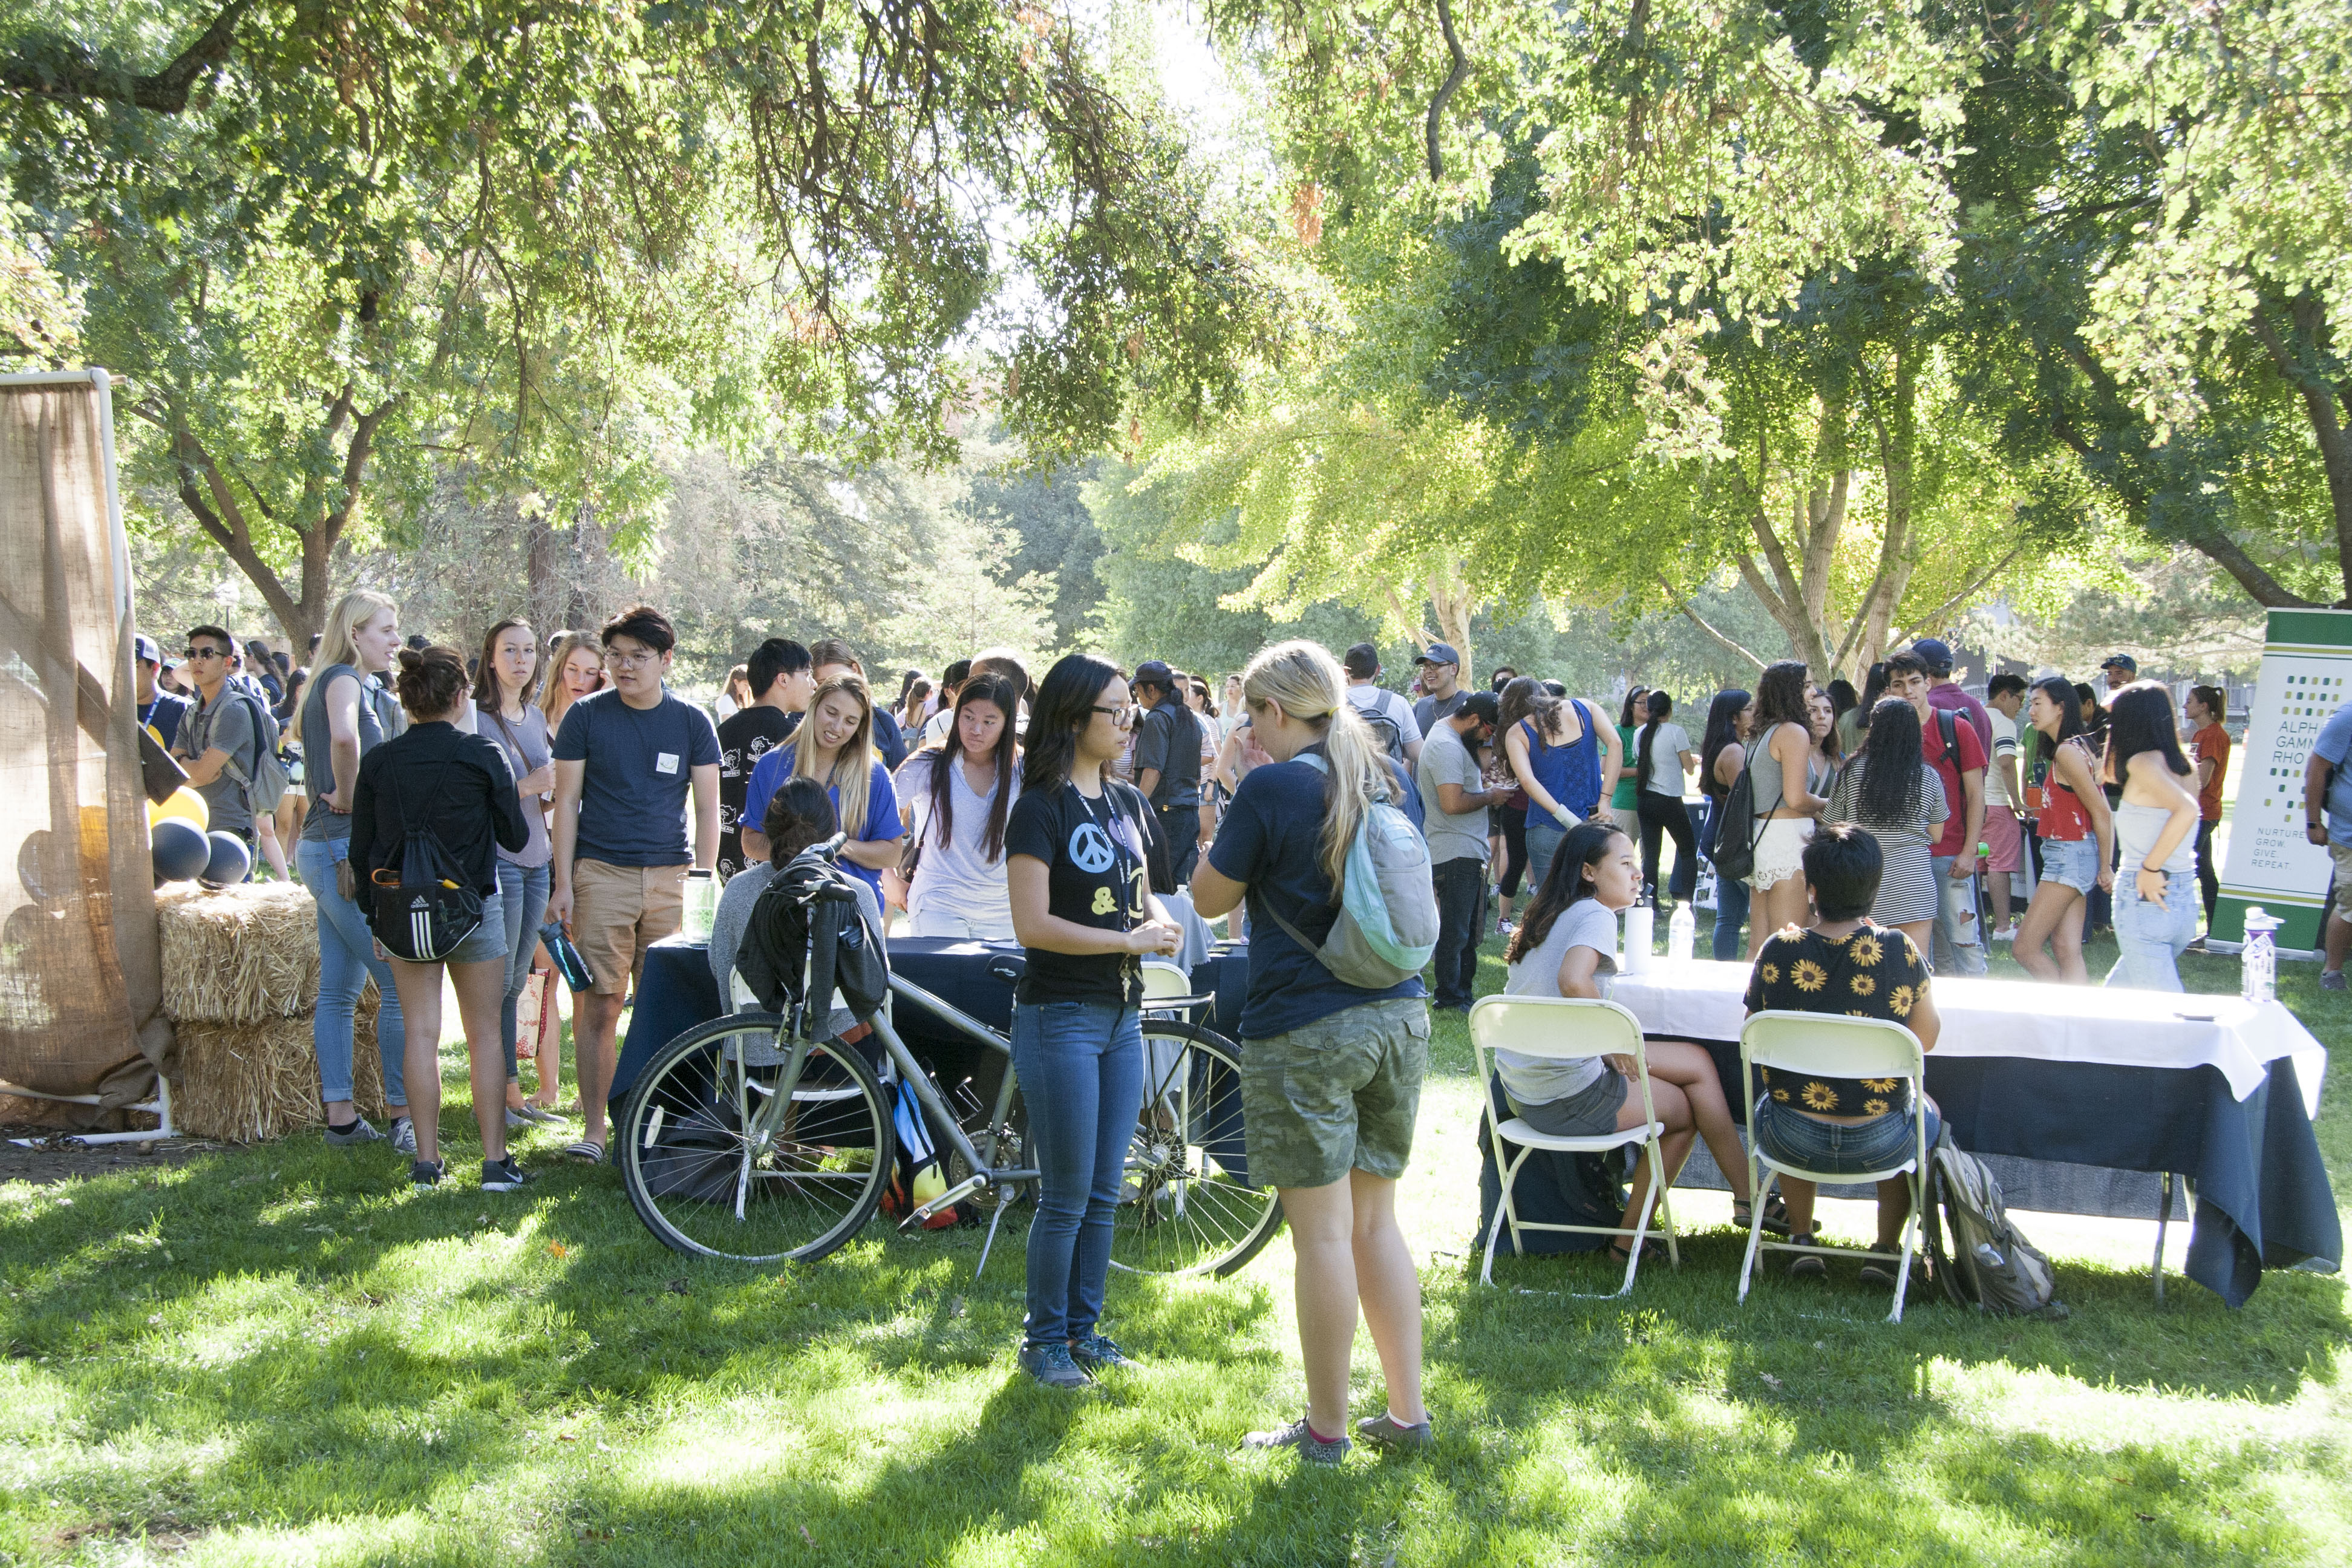 Events sponsored by the college, such as the annual ice cream social, help build a sense of community for our students.